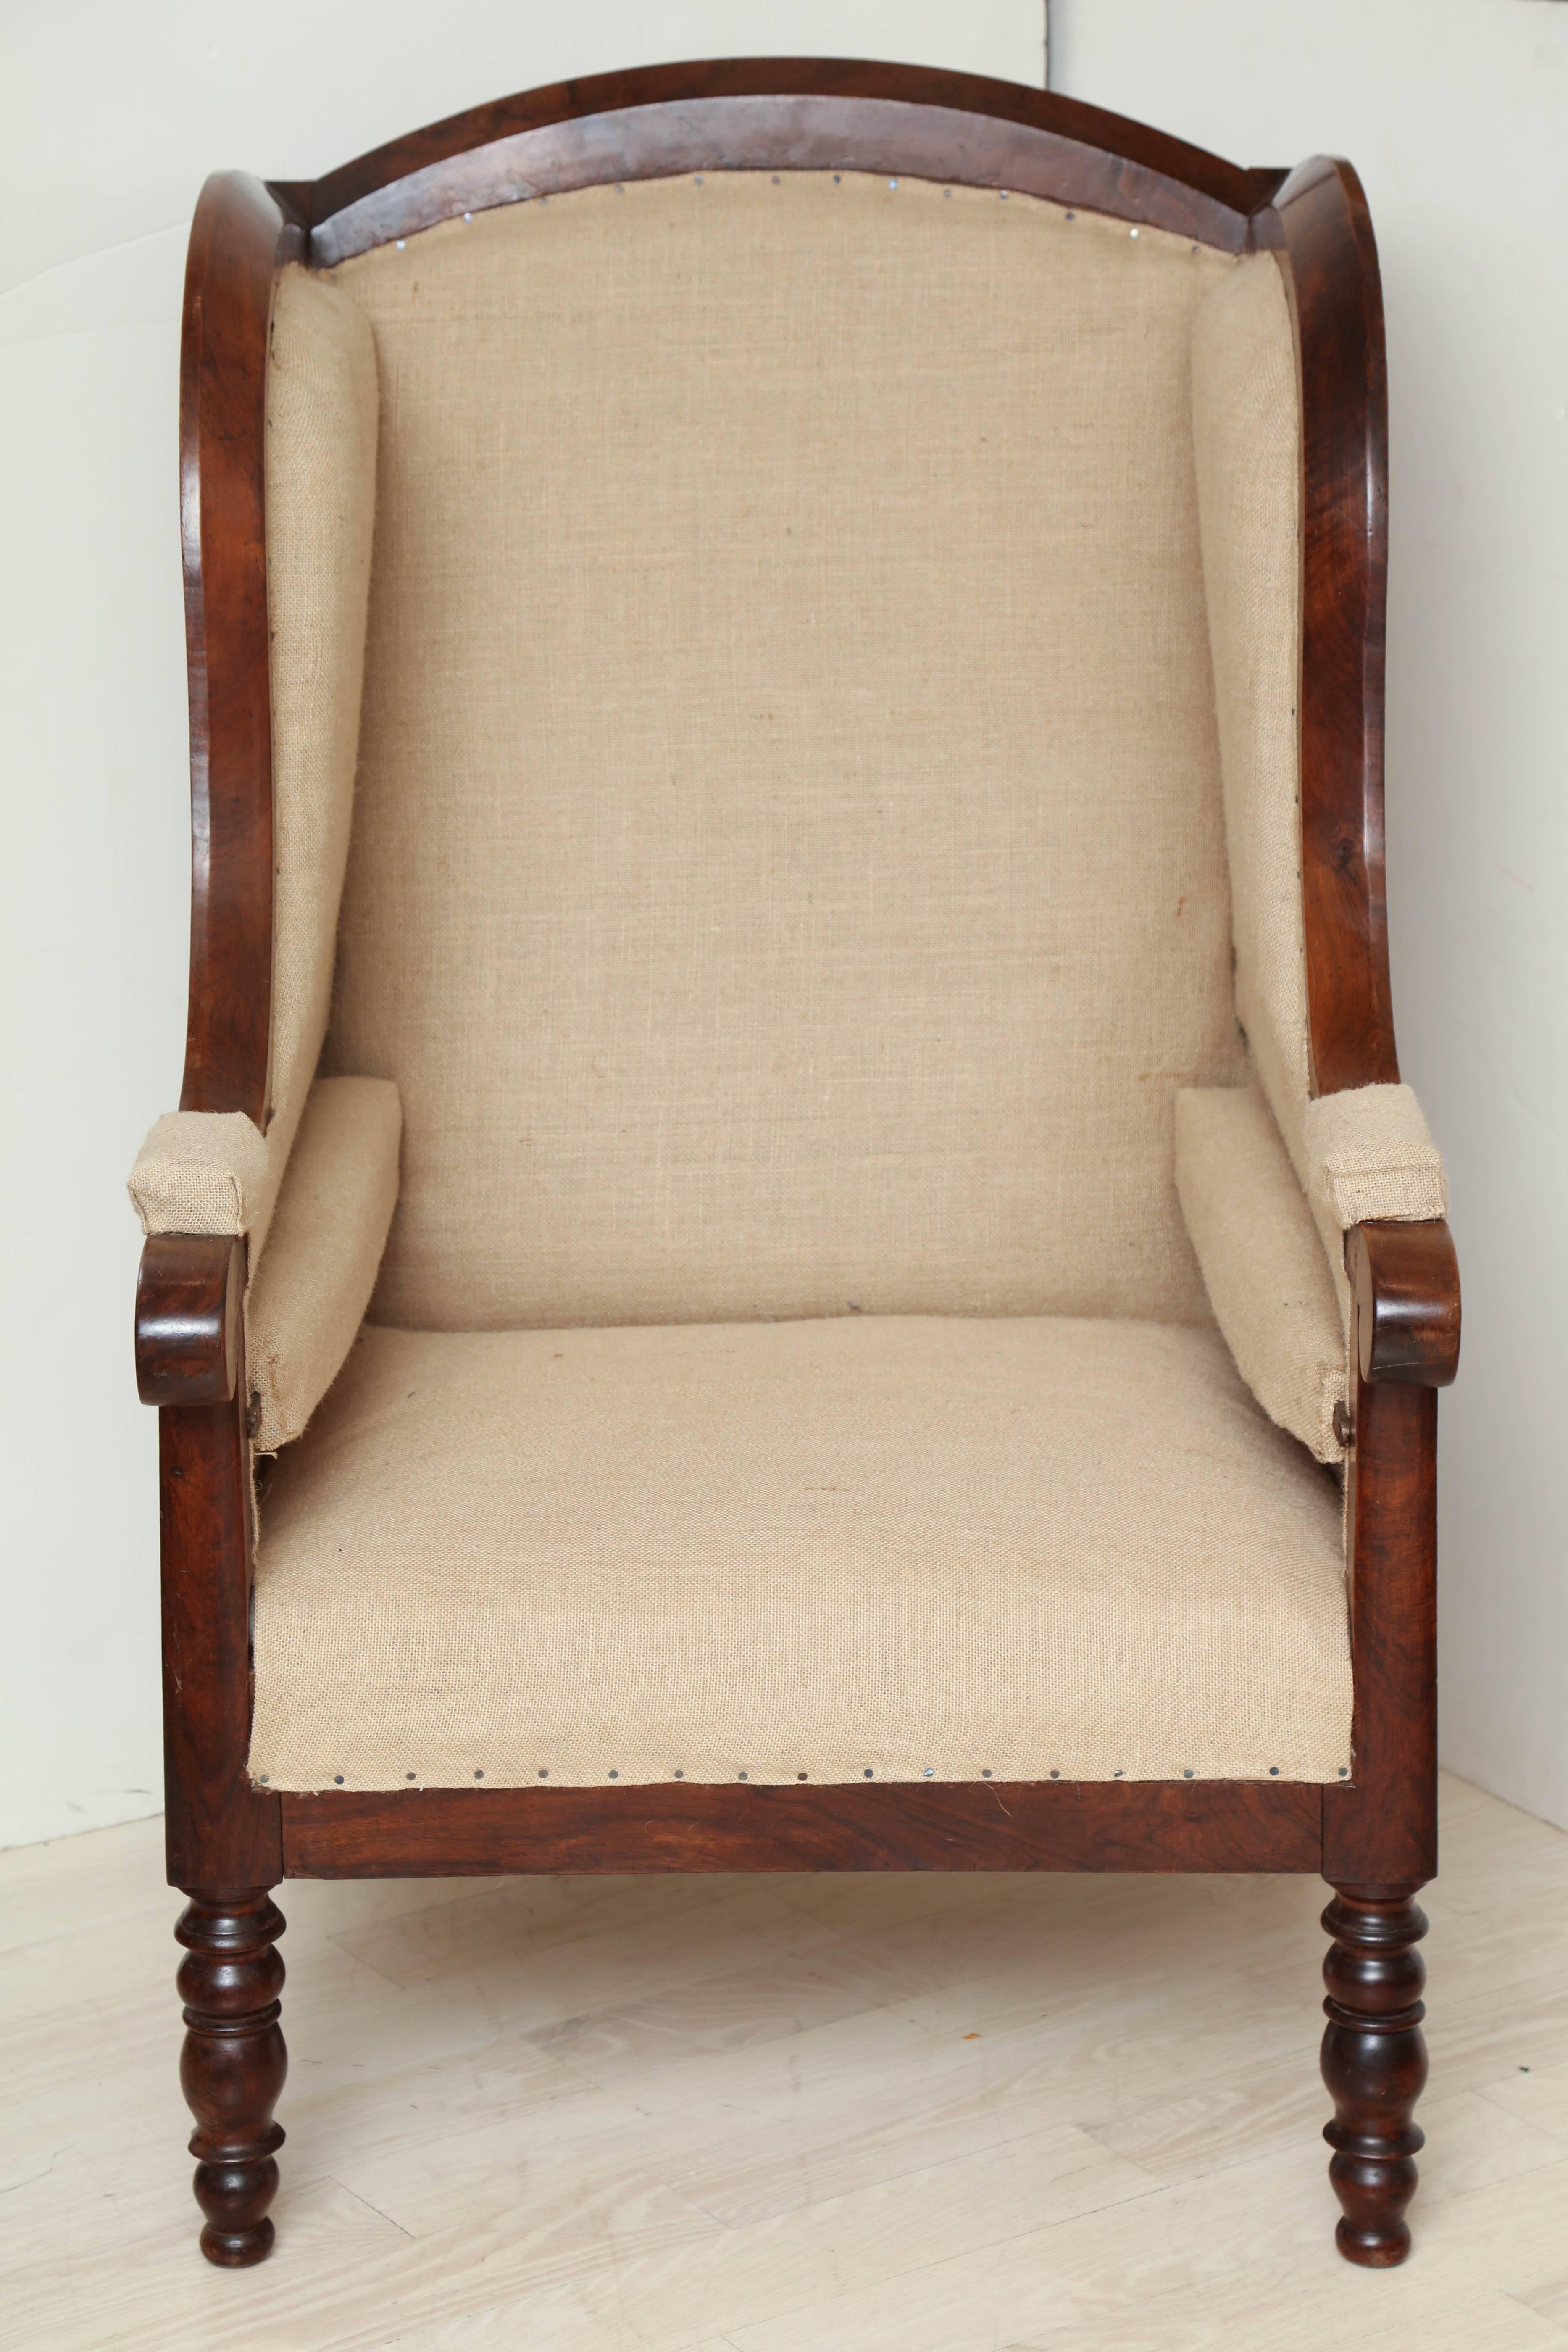 An unusually large walnut framed upholstered wing chair, France, circa 1810.


Available to see in our NYC Showroom 
BK Antiques
306 East 61st St. 2nd fl.
New York, NY 10065